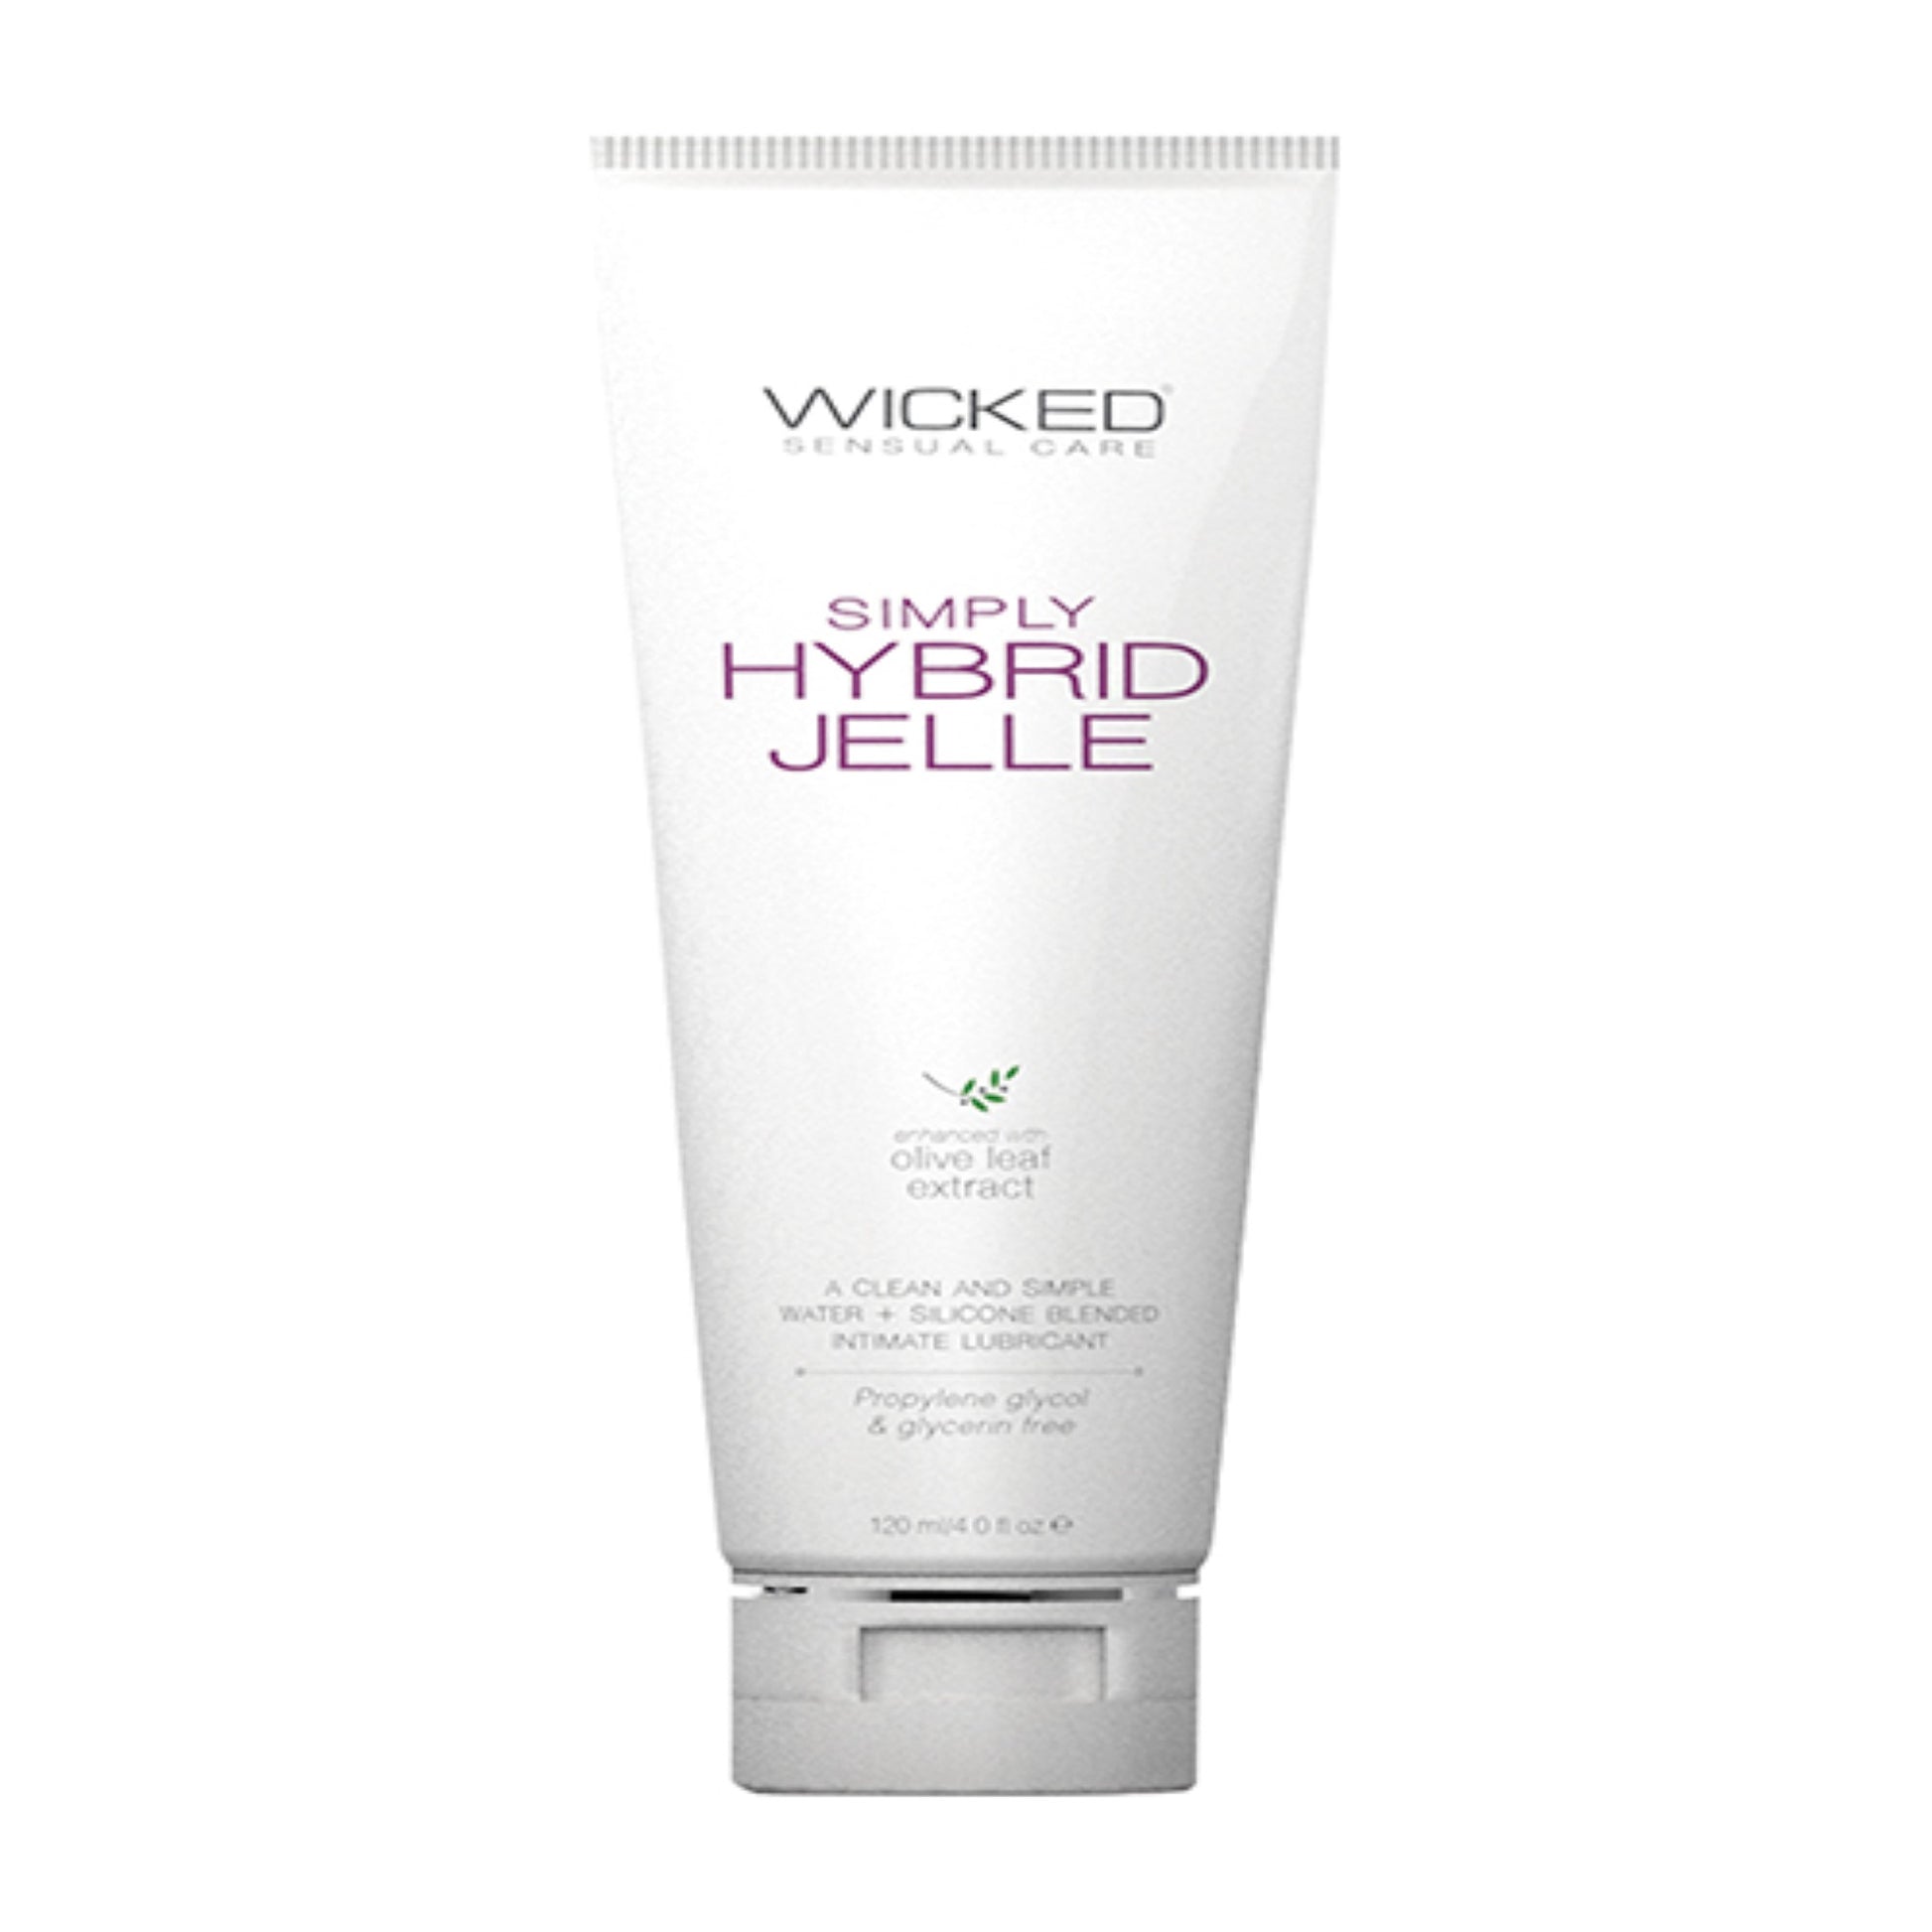 Wicked-Simply-Hybrid-Jelle